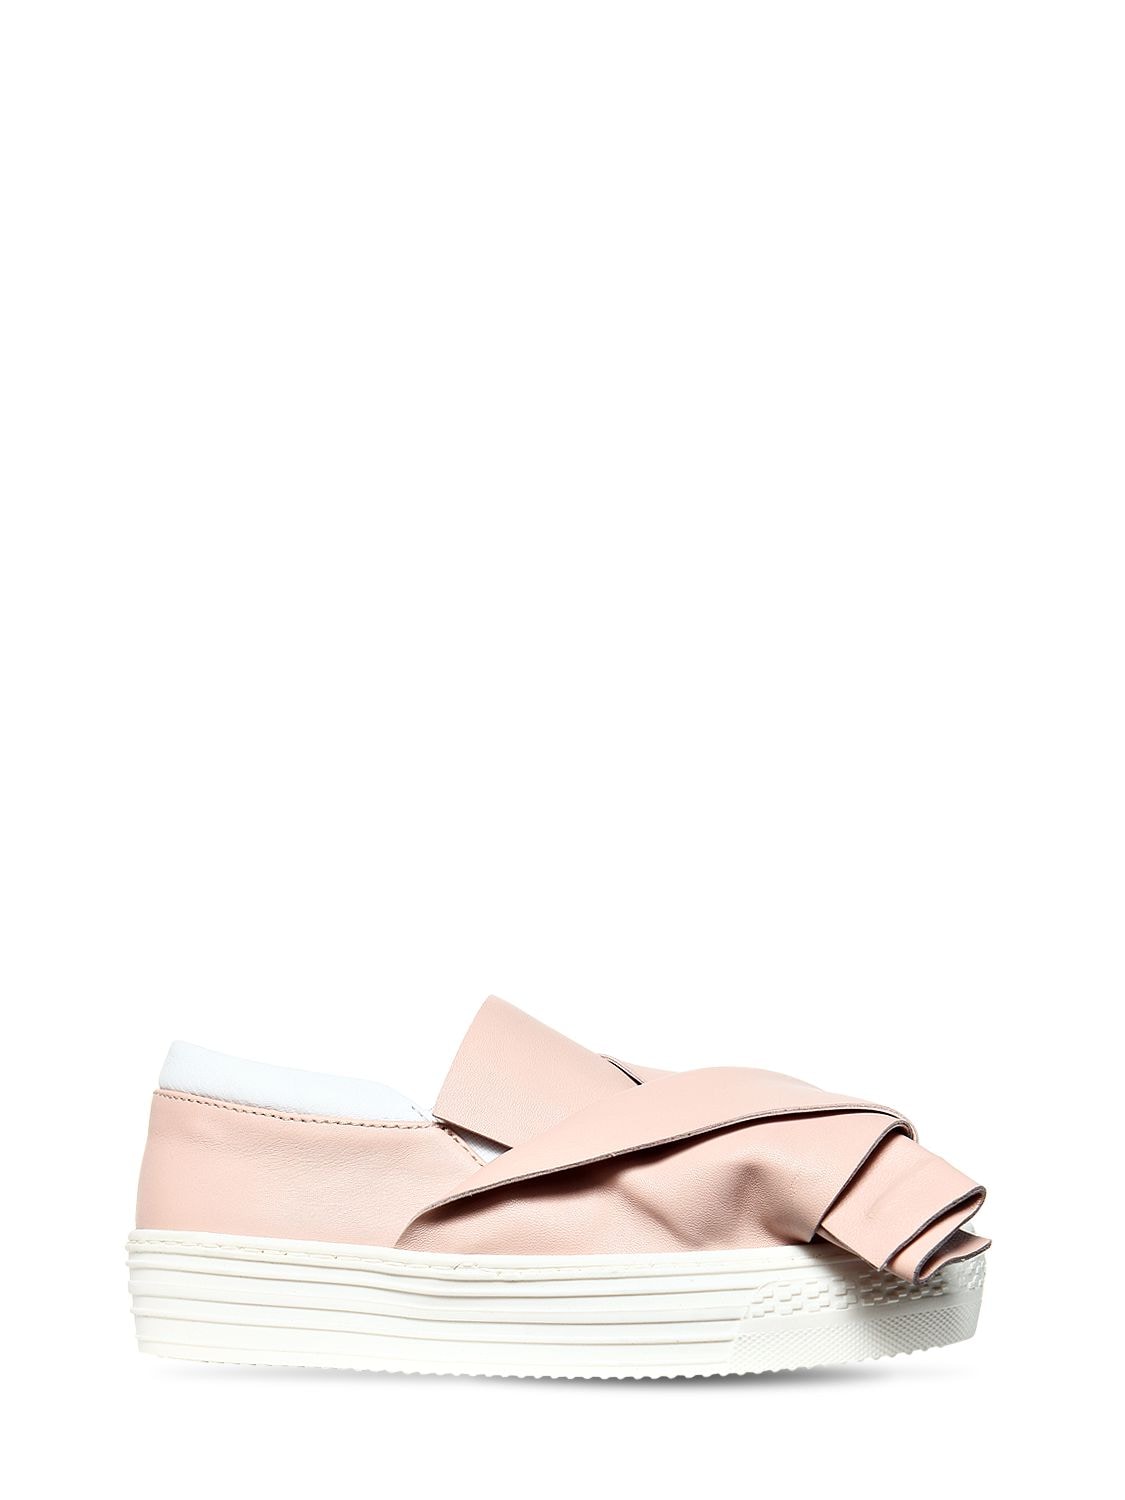 N°21 Kids' Bow Nappa Leather Slip-on Sneakers In Pink